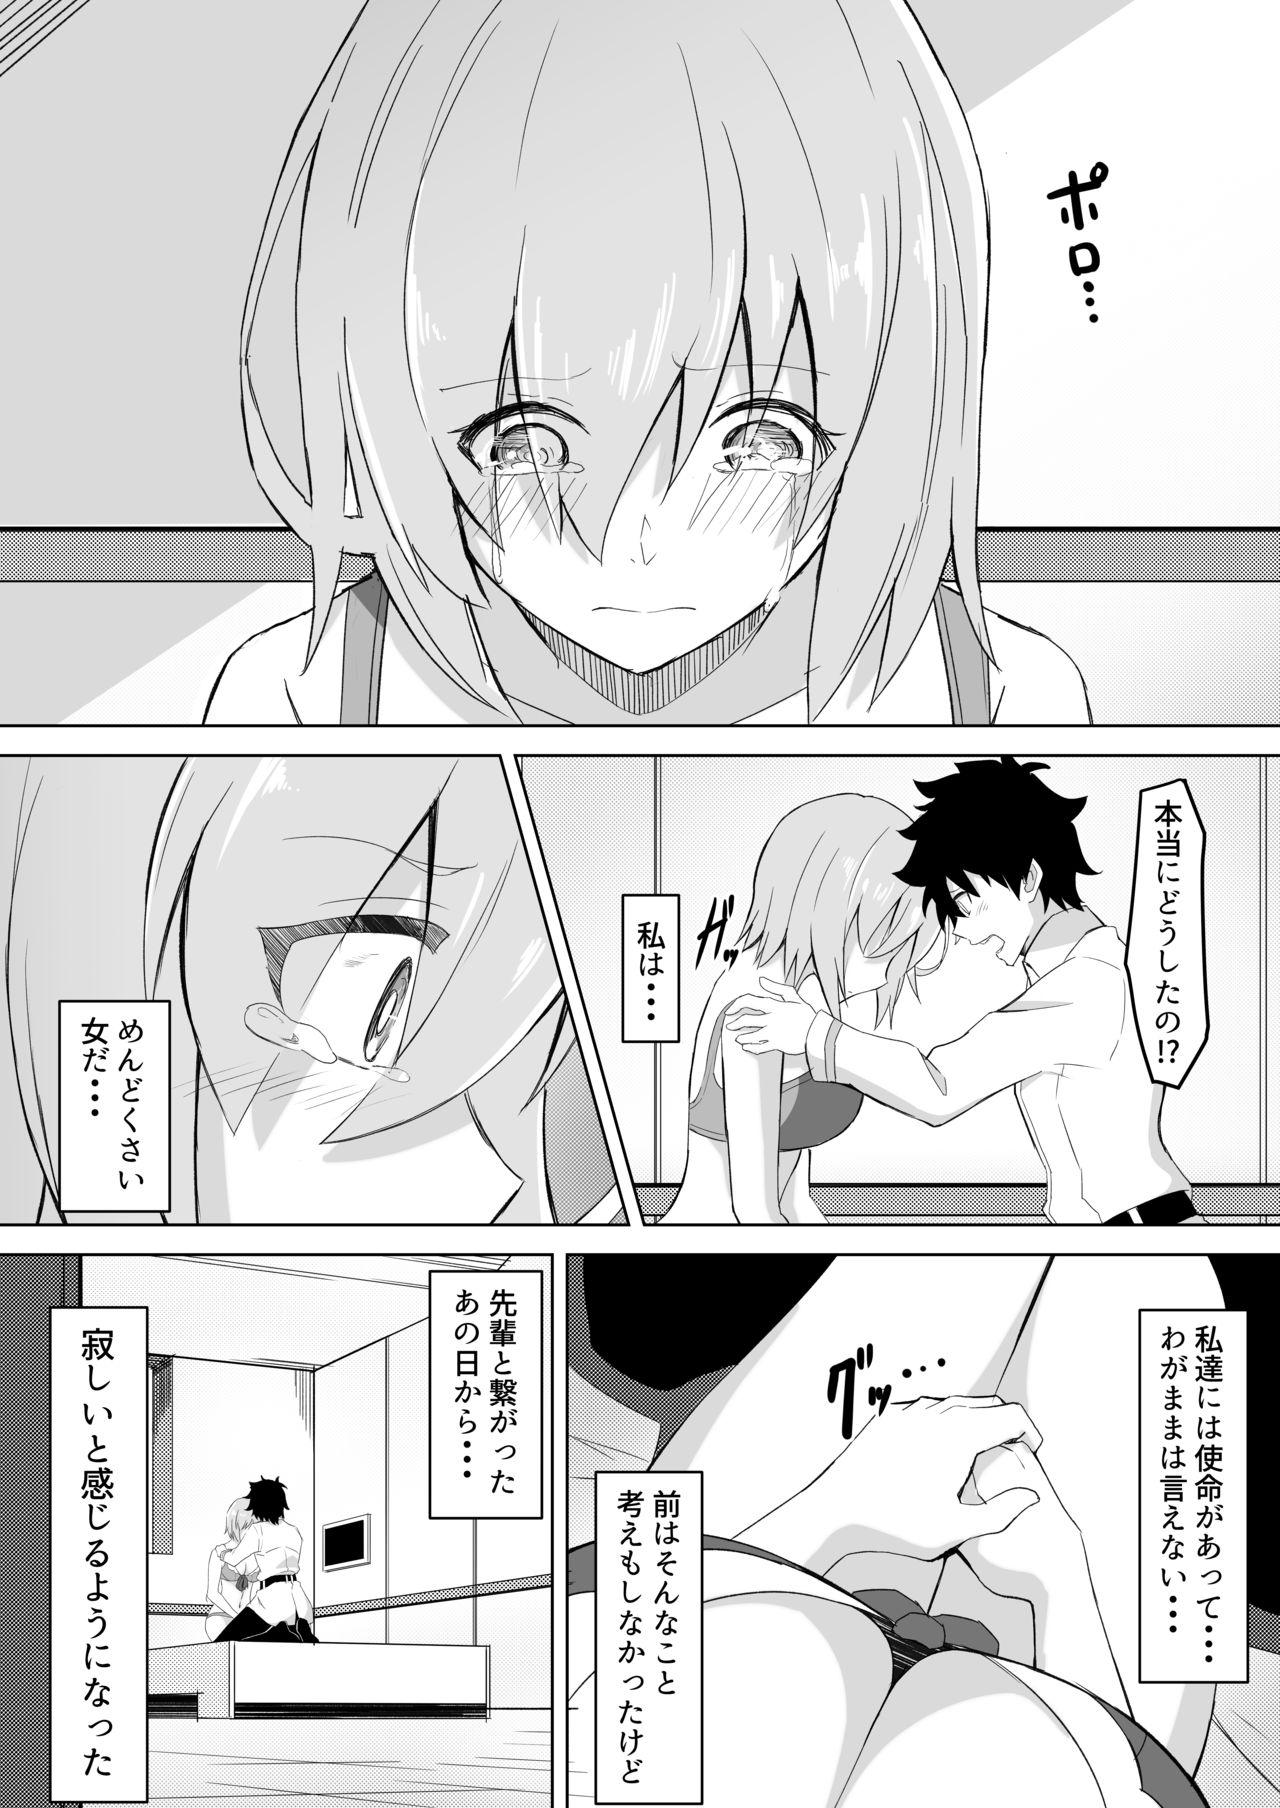 Interracial Mash Was Jealousy - Fate grand order Lick - Page 9